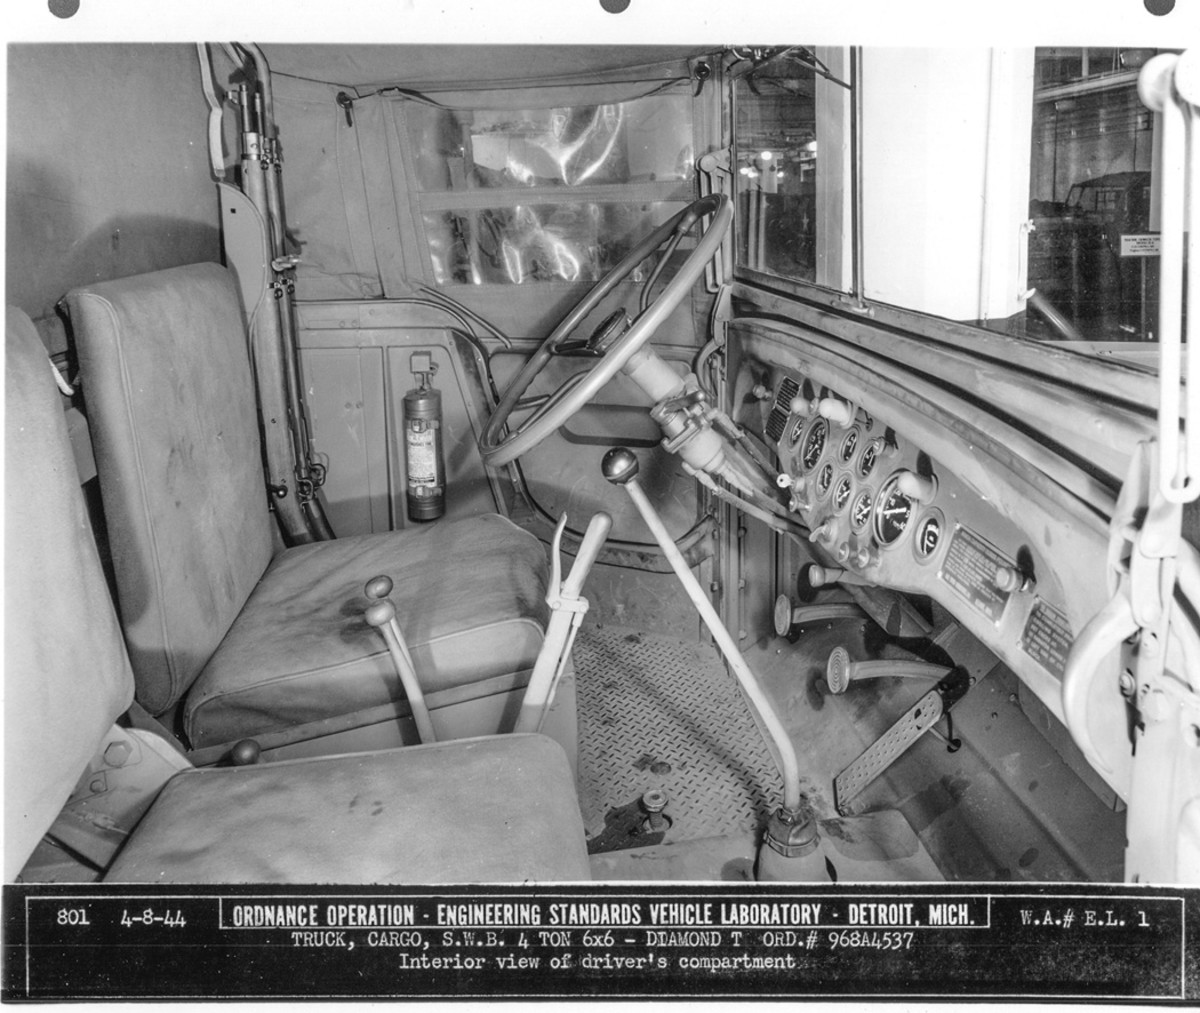 An 8 April 1944 photo depicts the interior of the open cab of Diamond T serial number 968A4537. Between the seats are, rear to front, the power takeoff shift lever (only the knob is visible), the transfer shift lever and transfer declutch lever (side by side), the parking-brake lever, and the transmission shift lever. A fire extinguisher is on the far side of the cab, to the front of the rifle brackets.